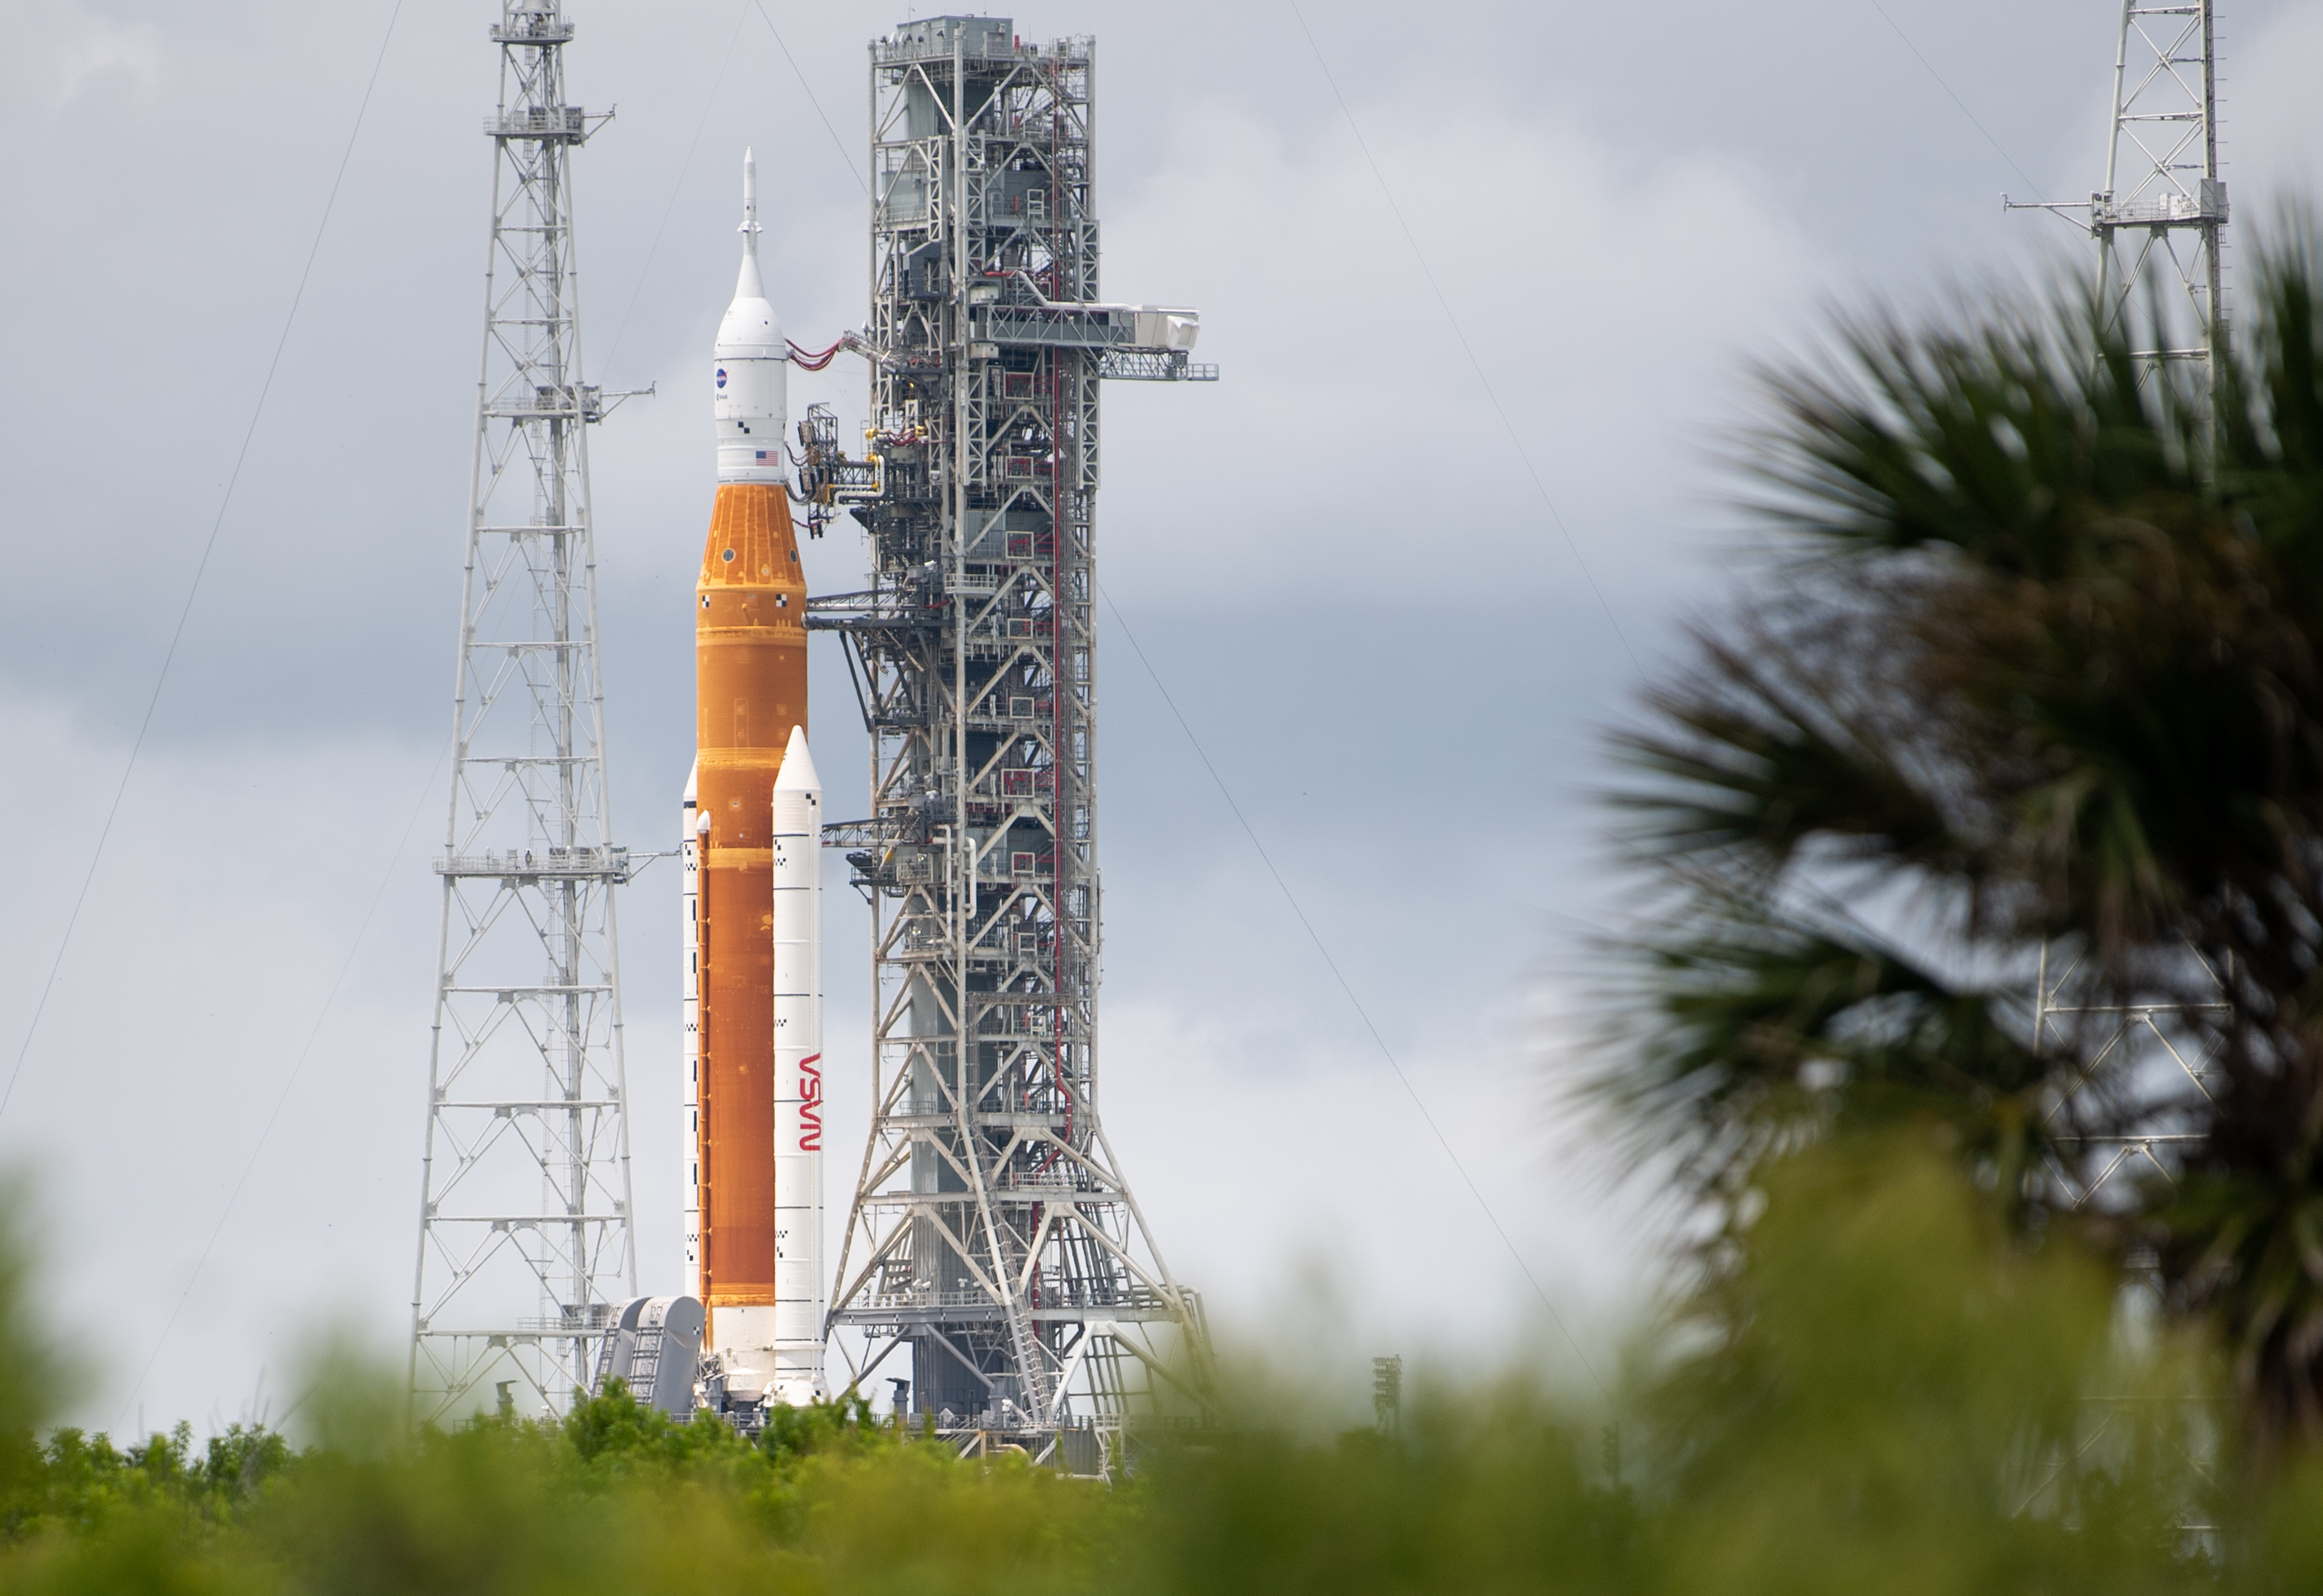 NASA’s Artemis I launch called off due to tropical
storm